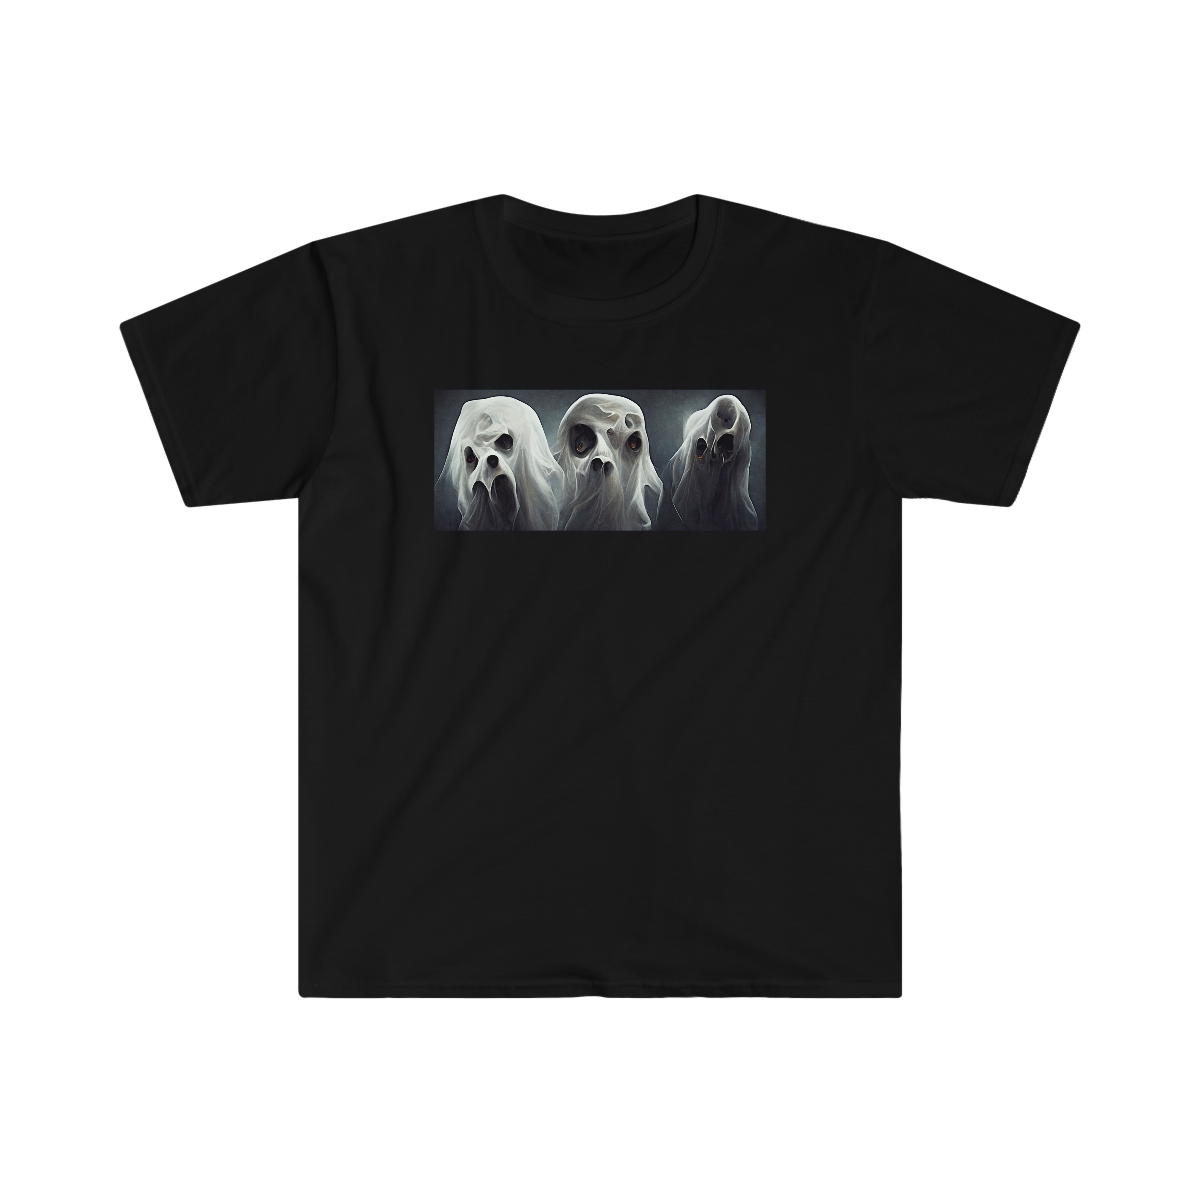 Spooked - Unisex Softstyle T-Shirt